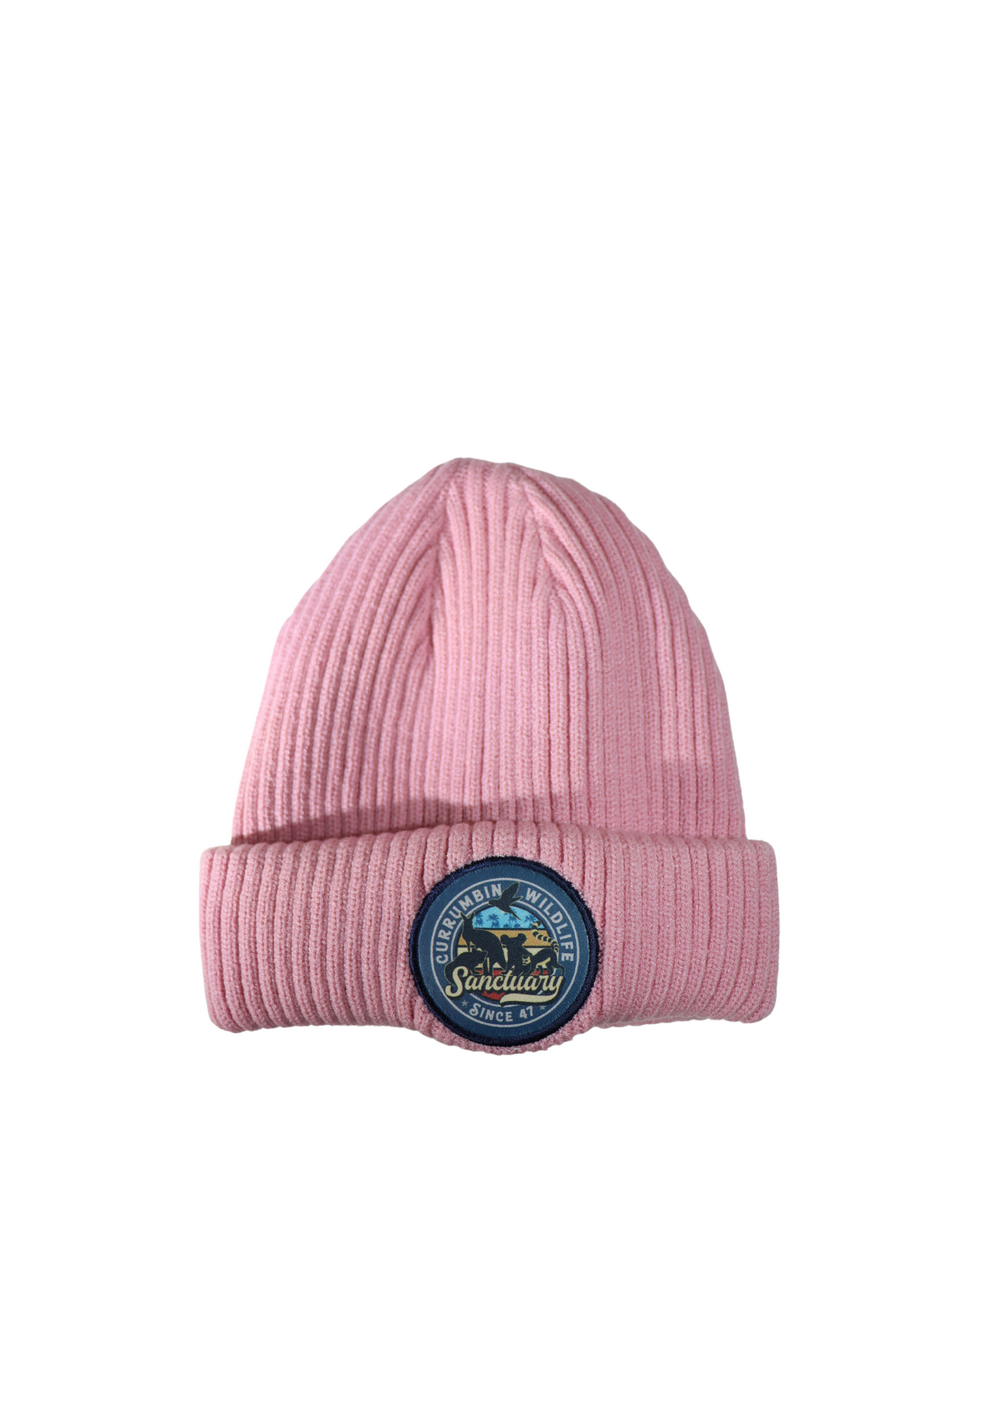 CWS Since 47 Montage Adult Beanie - Dusty Rose